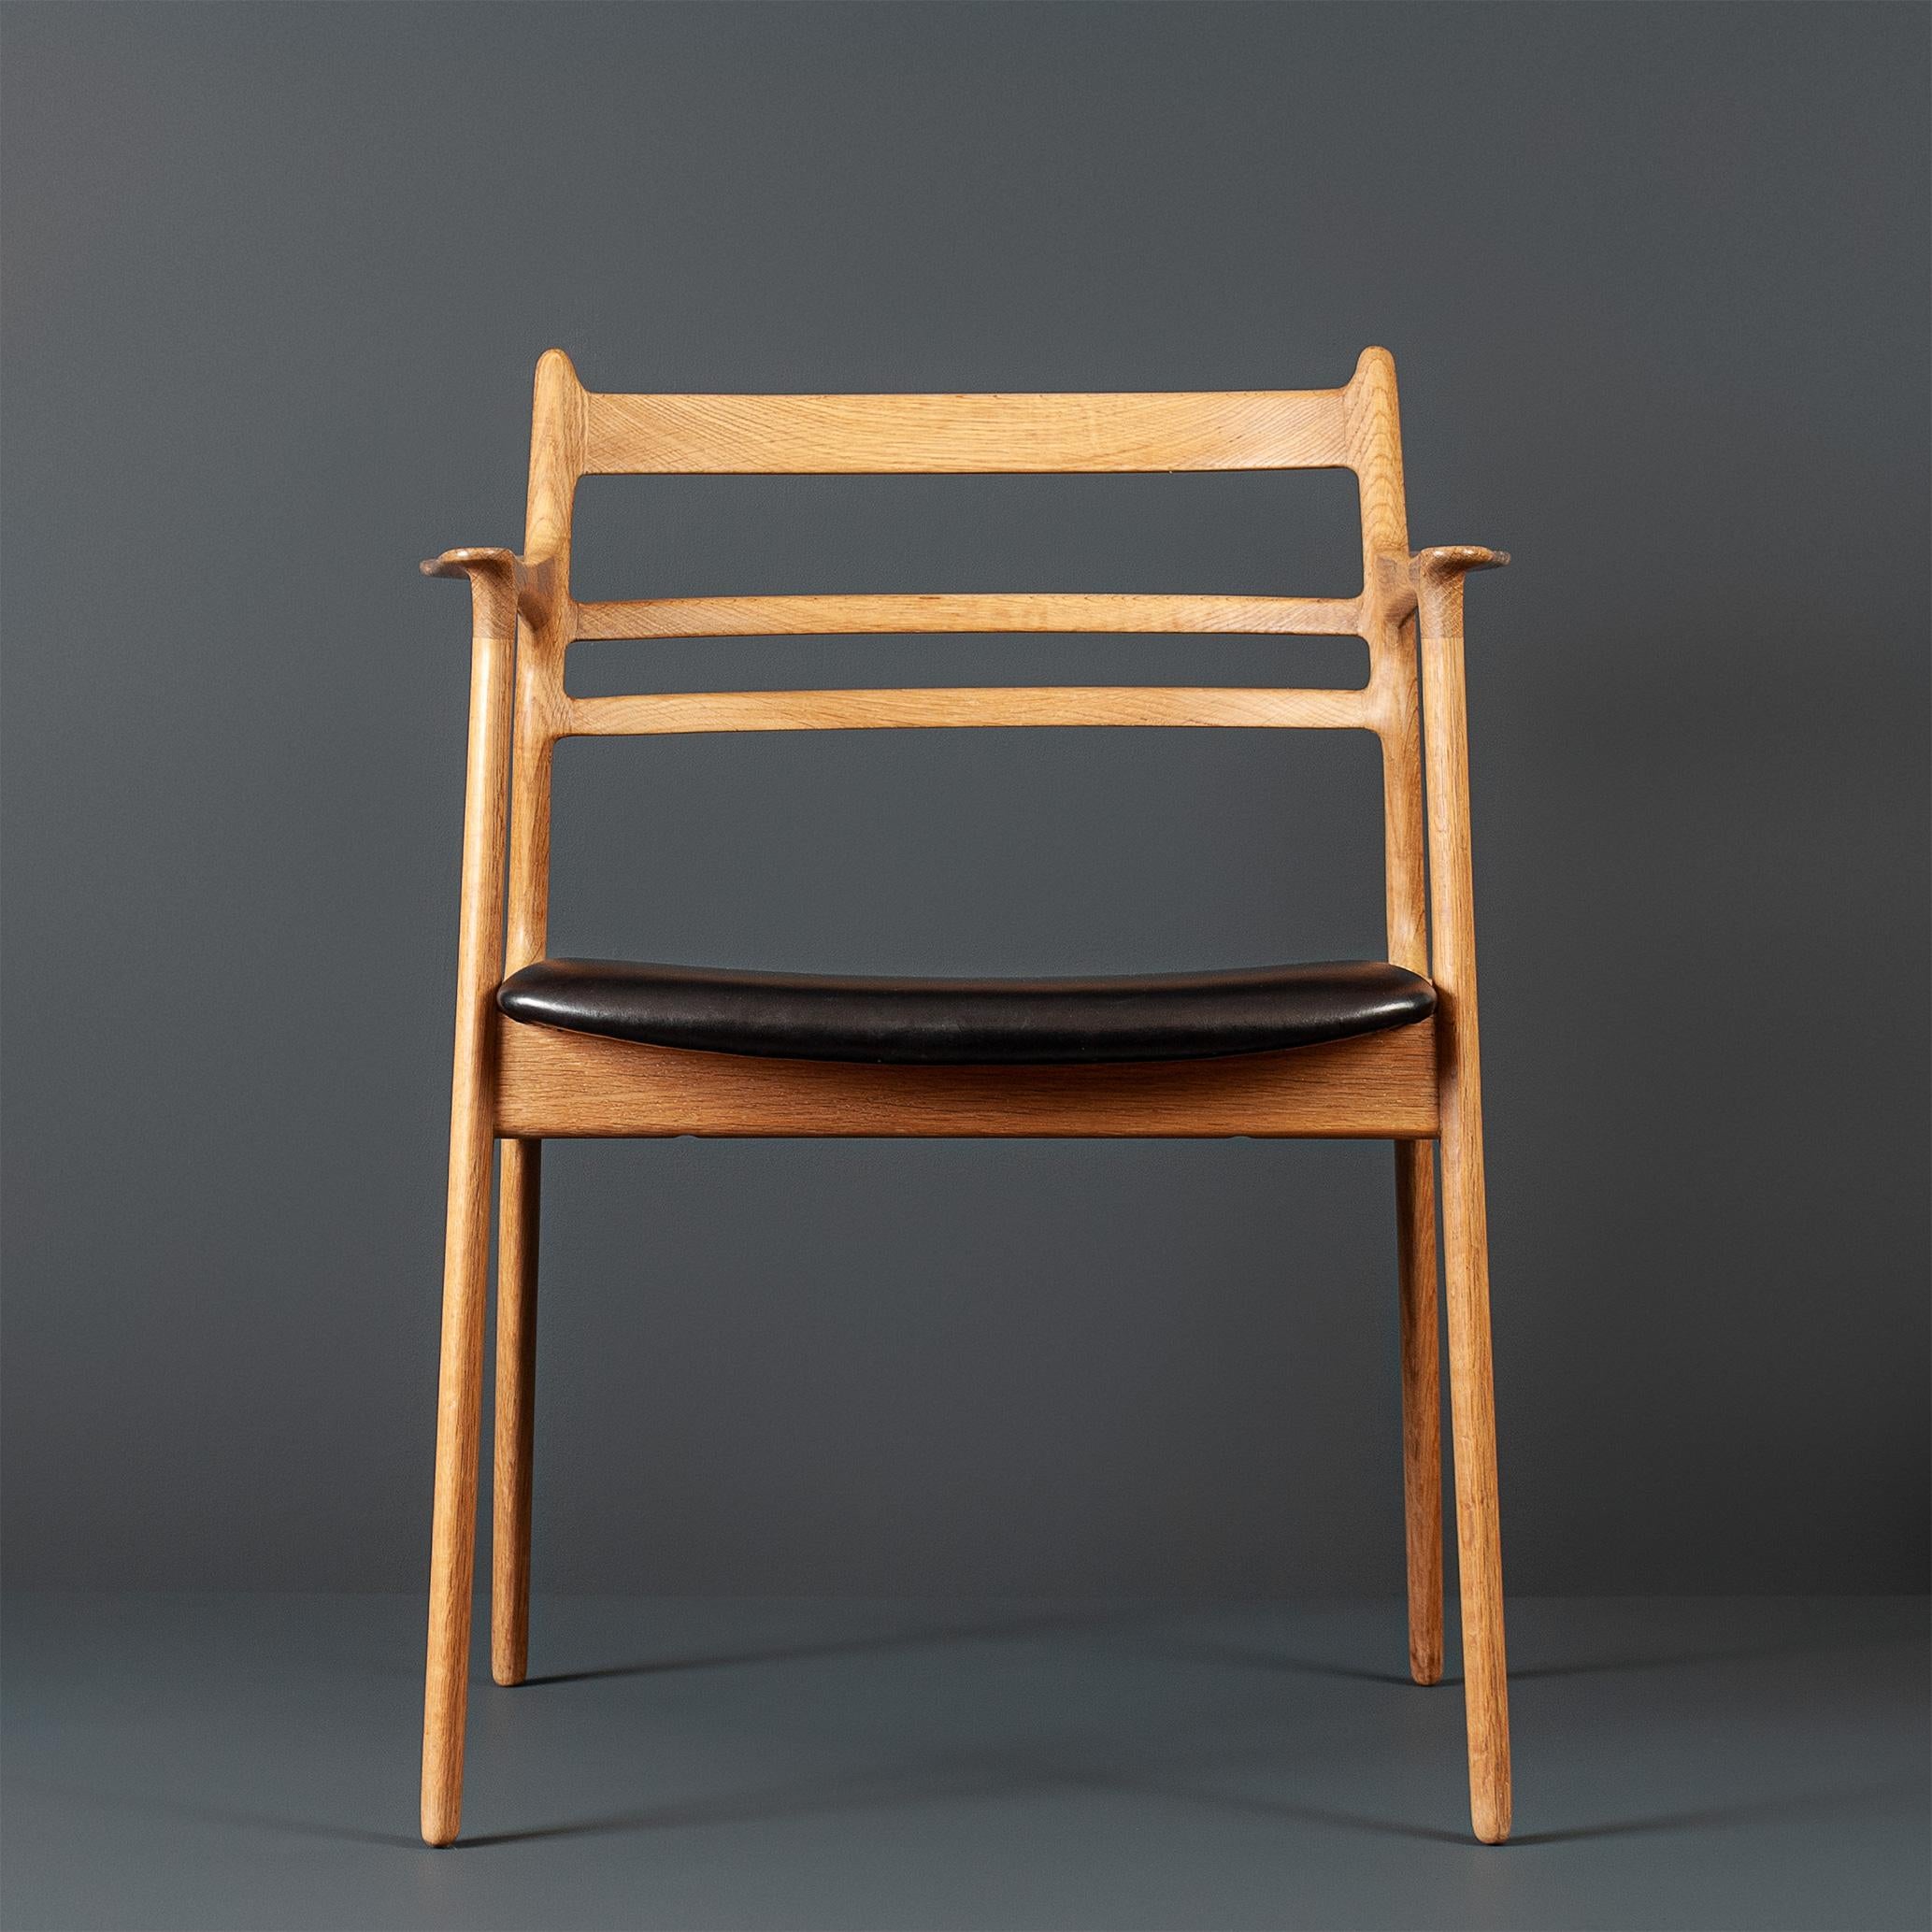 A remarkable and unique oak and leather chair. Striking curved and slick streamlined frame with a design aesthetic straight from the Moller book. The oak frame has been thoroughly cleaned and re-soaped as per the original and traditional method. The